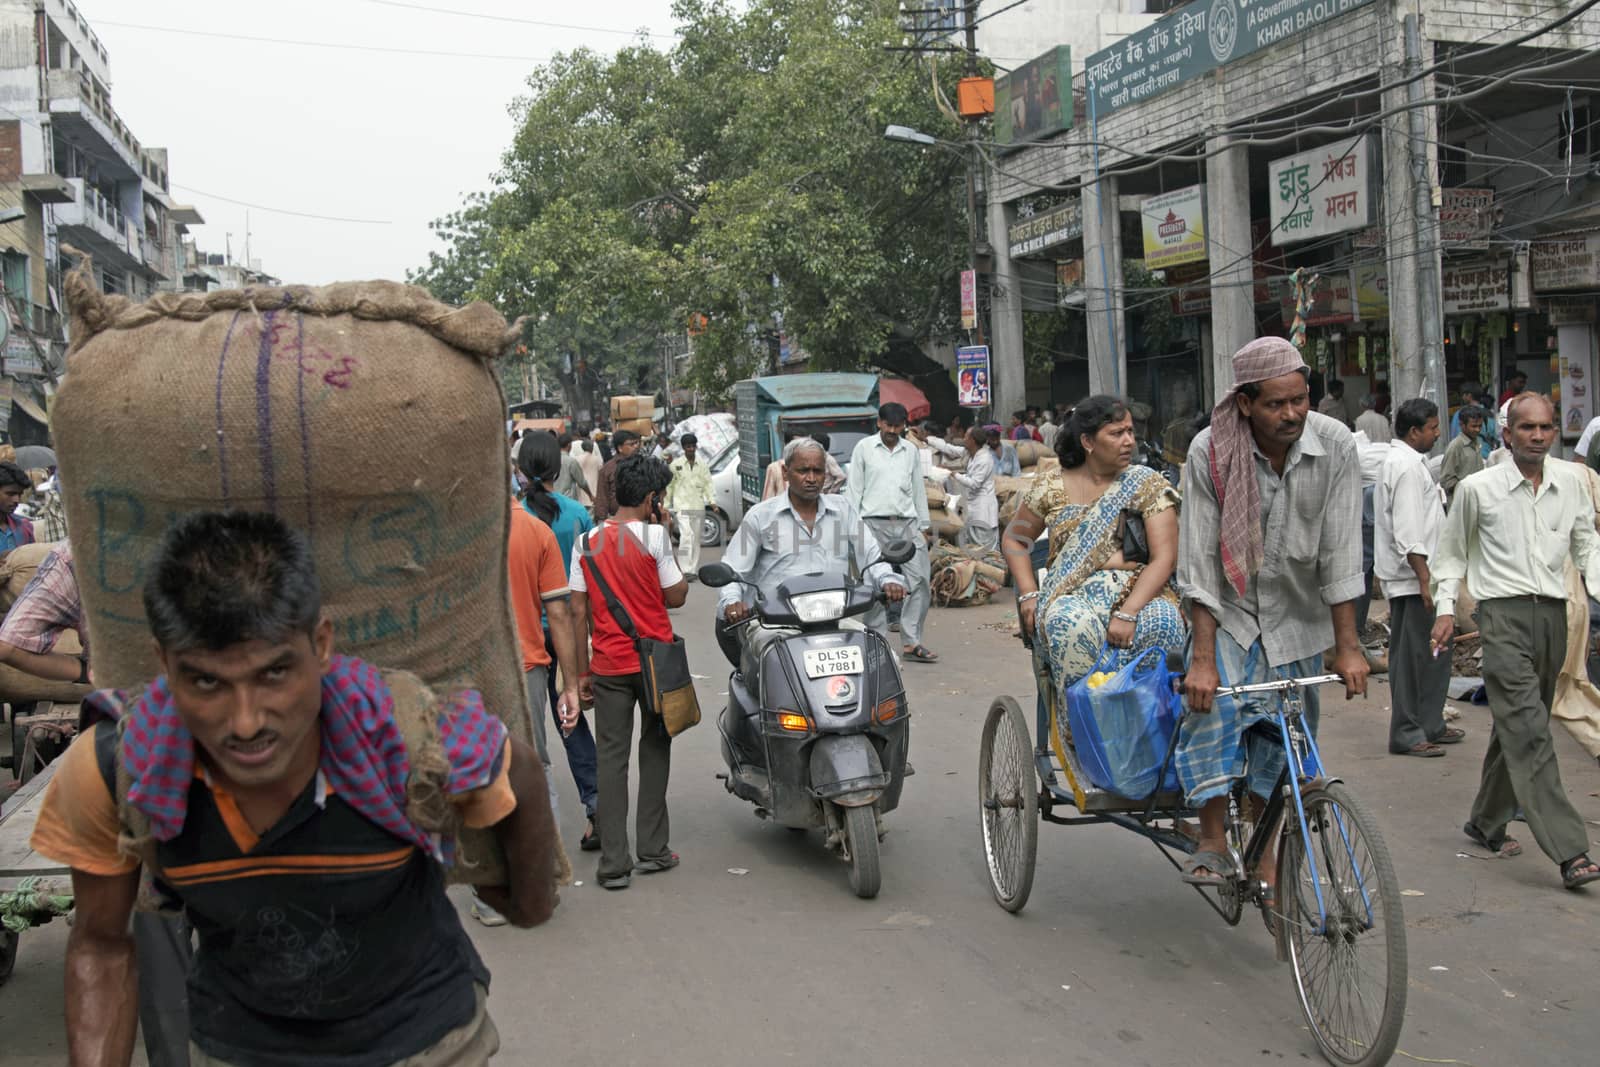 Man carrying heavy sack along crowded street in Old Delhi, India.